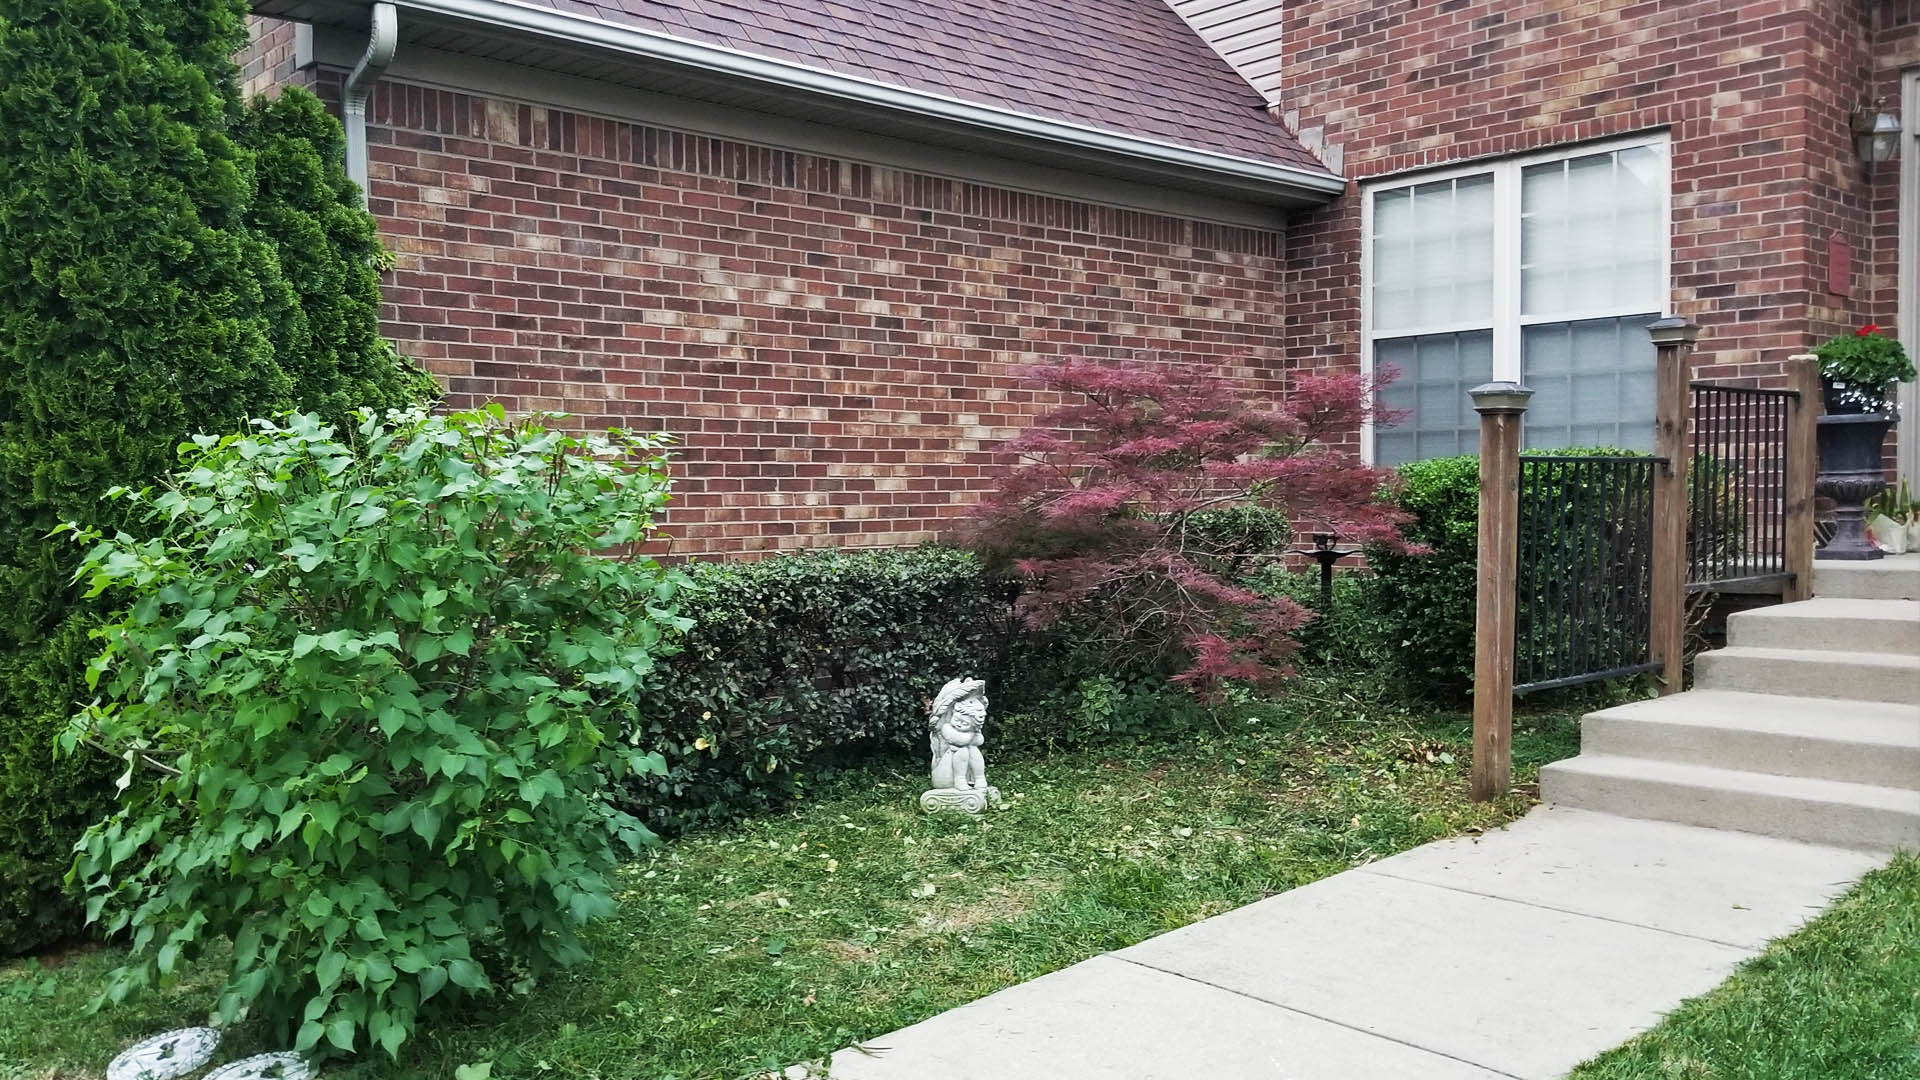 Residential yard clean up in Lexington, KY by Allen's Lawn Service.